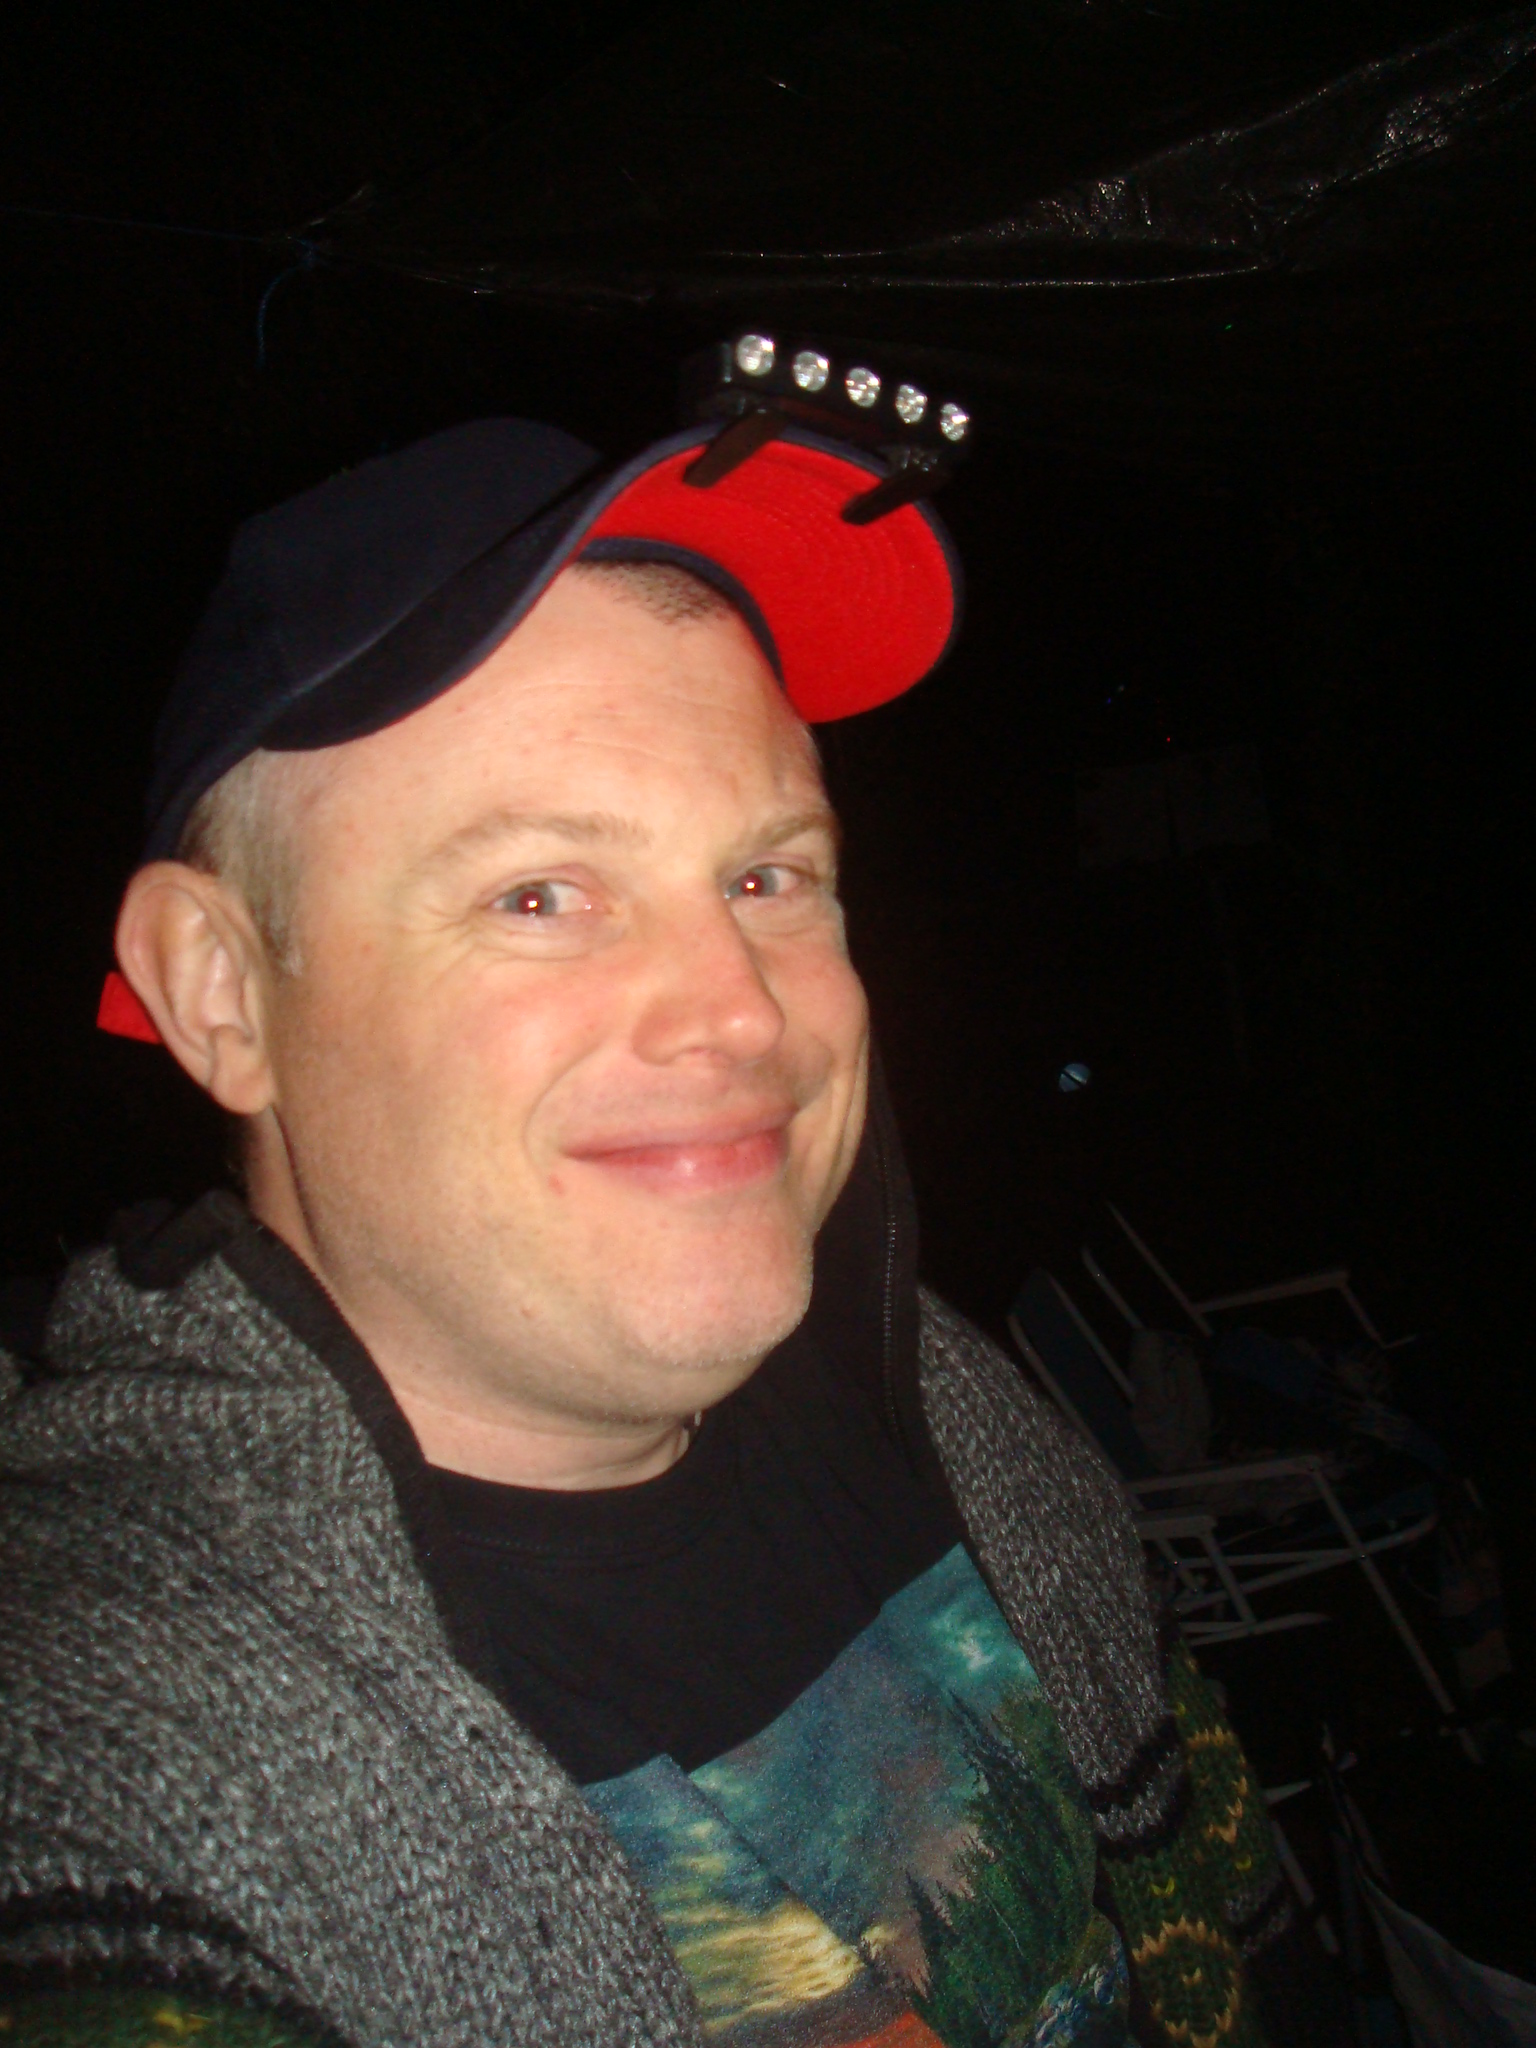 a man wearing a red hat with metal eyes